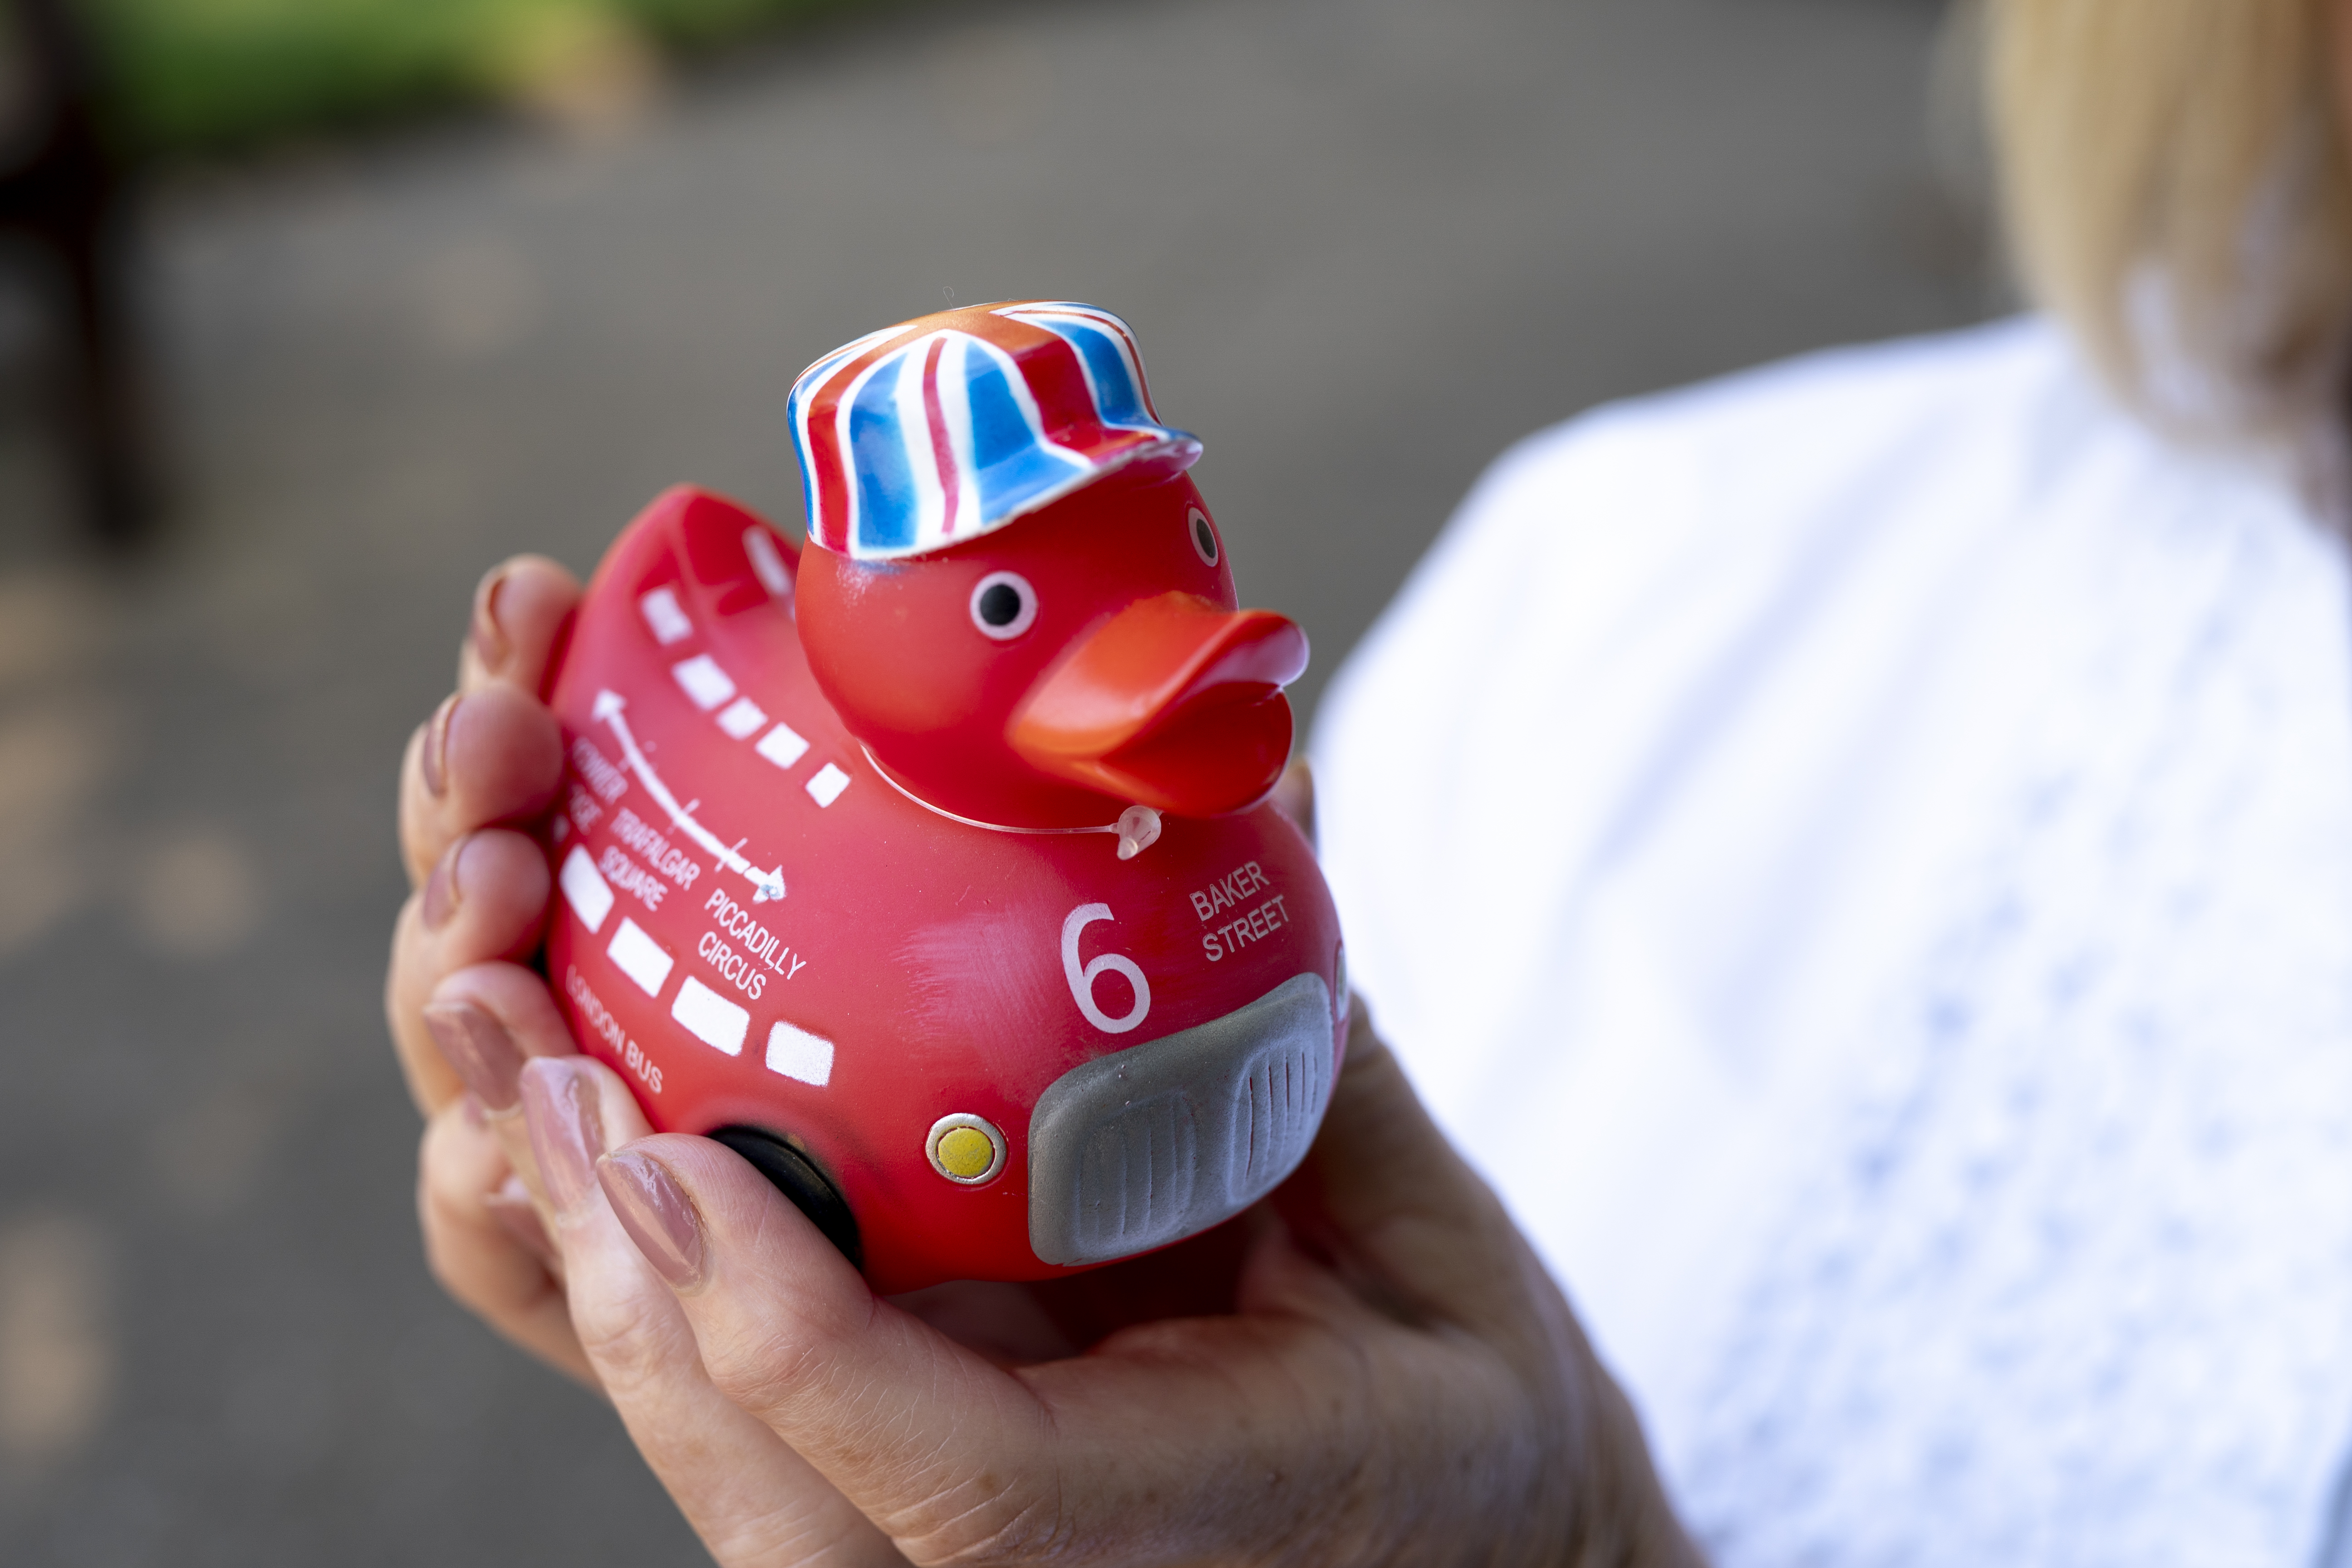 Rubber duck named after inquiry chair